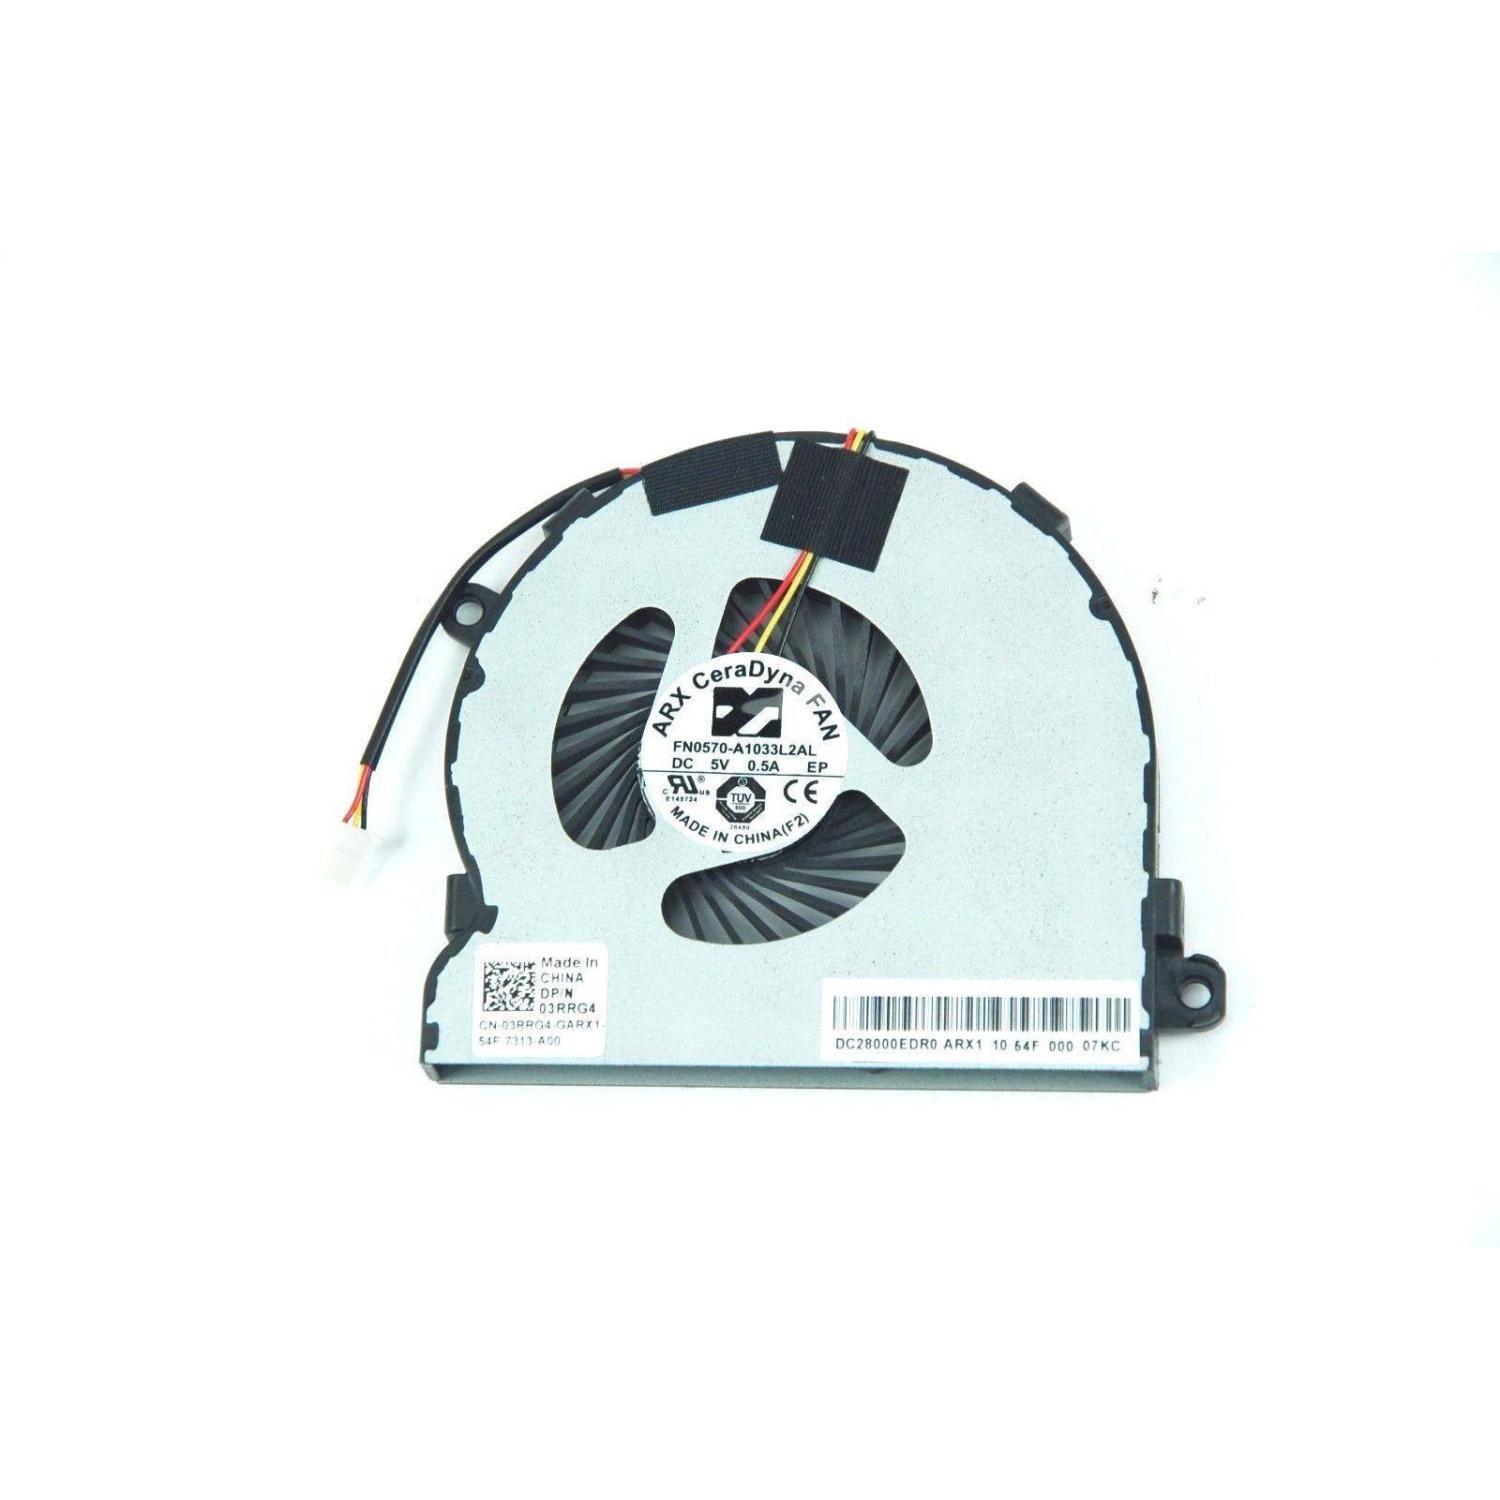 New Dell Inspiron 15 5000 5445 5542 5543 5545 Series CPU Fan 3RRG4 03RRG4 DC28000EDS0